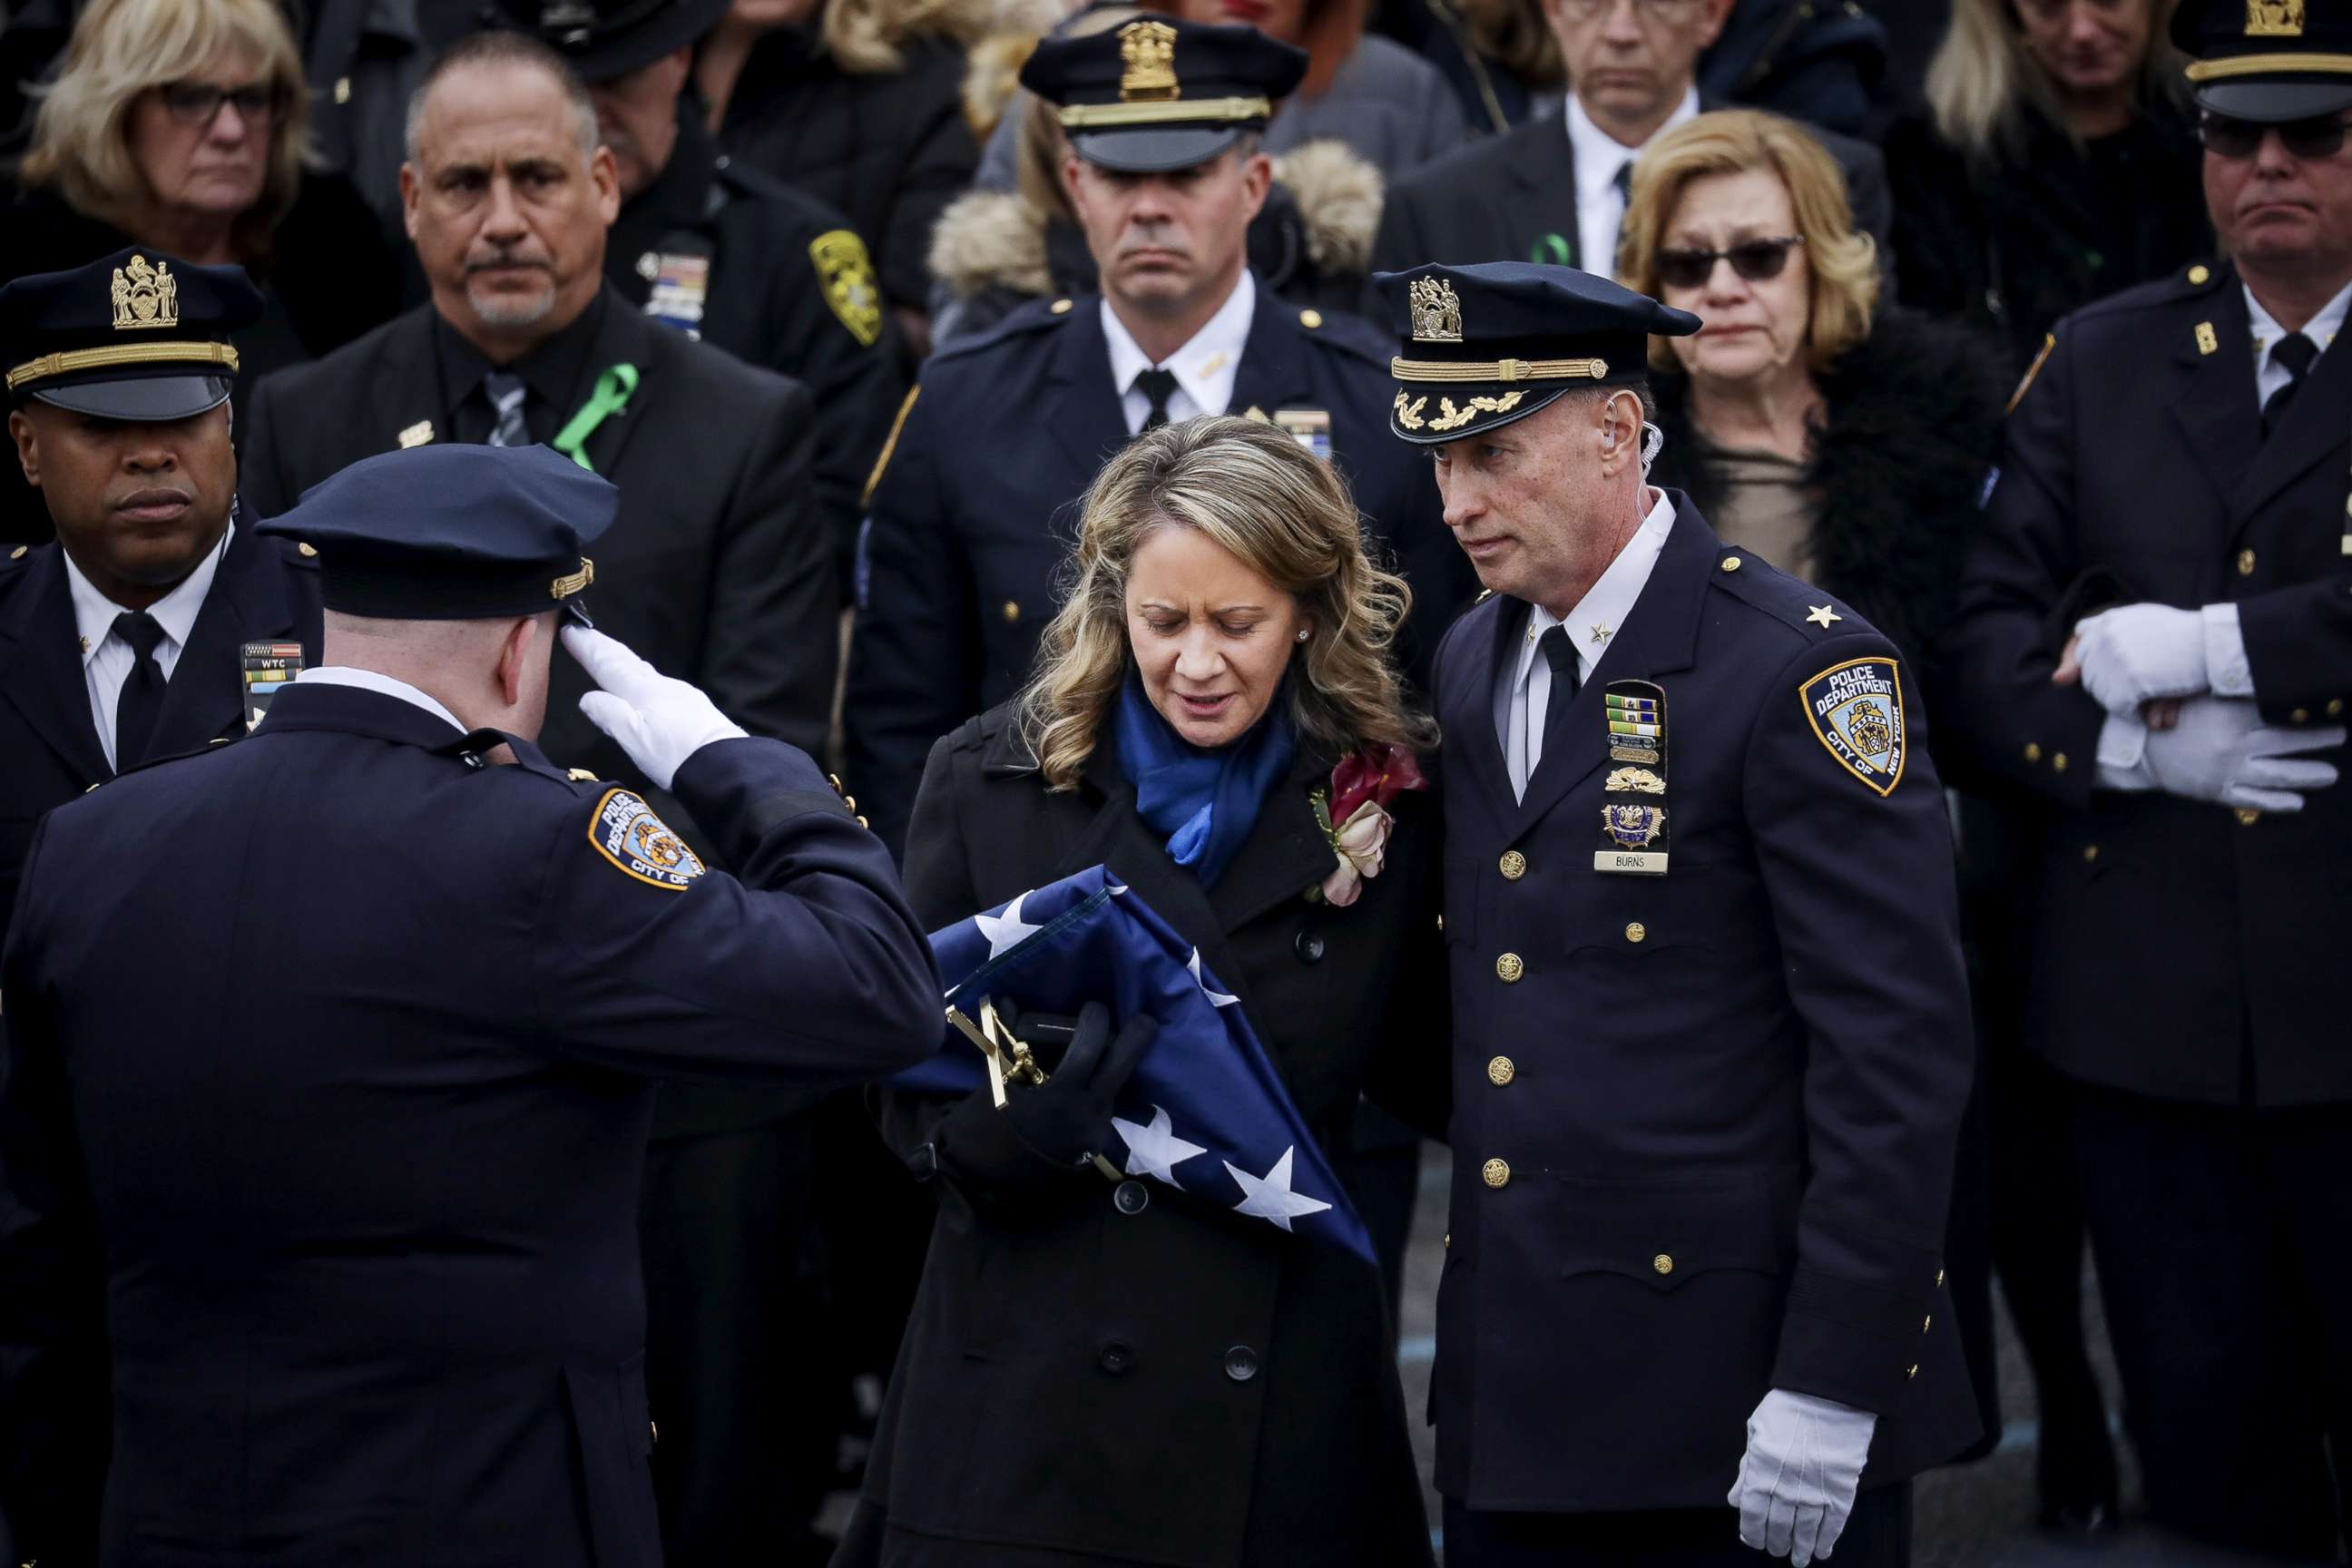 PHOTO: Leanne Simonsen, wife of fallen NYPD Detective Brian Simonsen receives a flag after her late husband's remains were carried out of the church following his funeral service at the Church of St. Rosalie, Feb. 20, 2019 in Hampton Bays, N.Y.